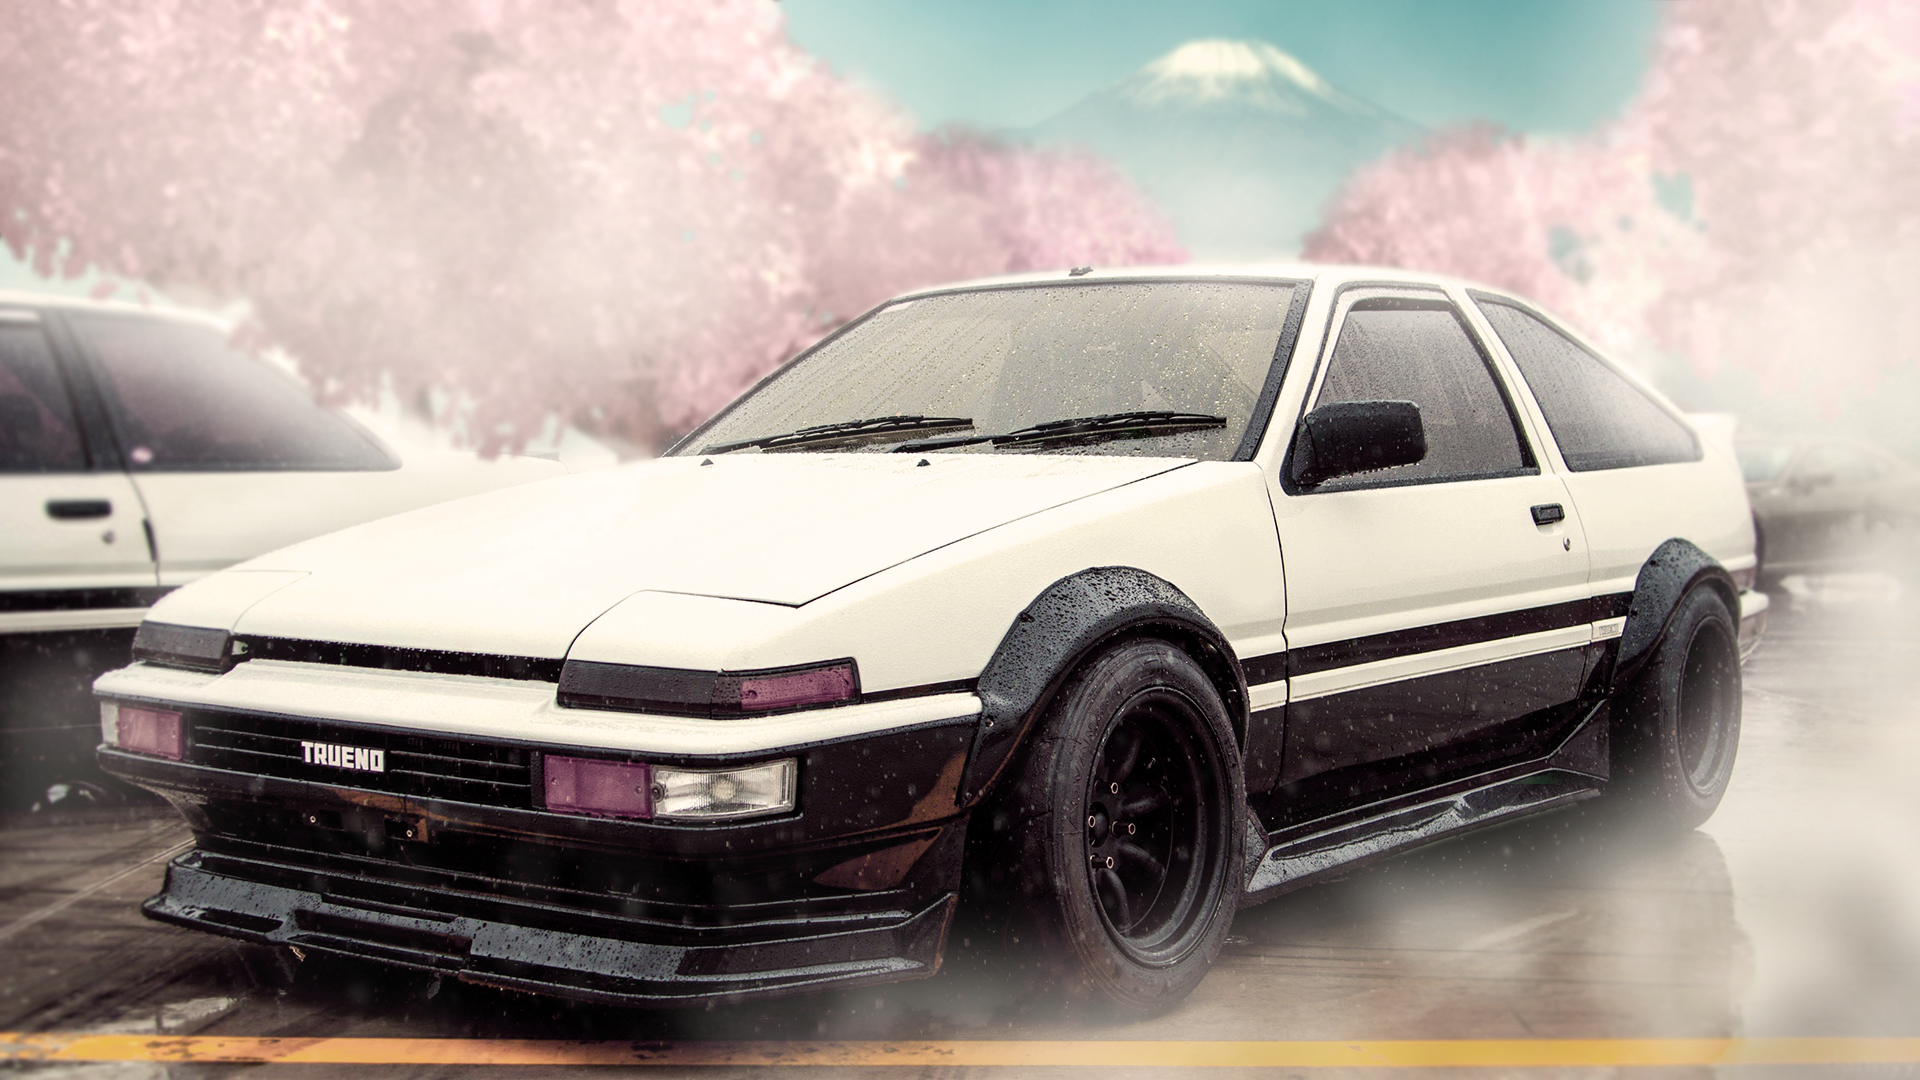 Toyota Ae86 Wallpapers